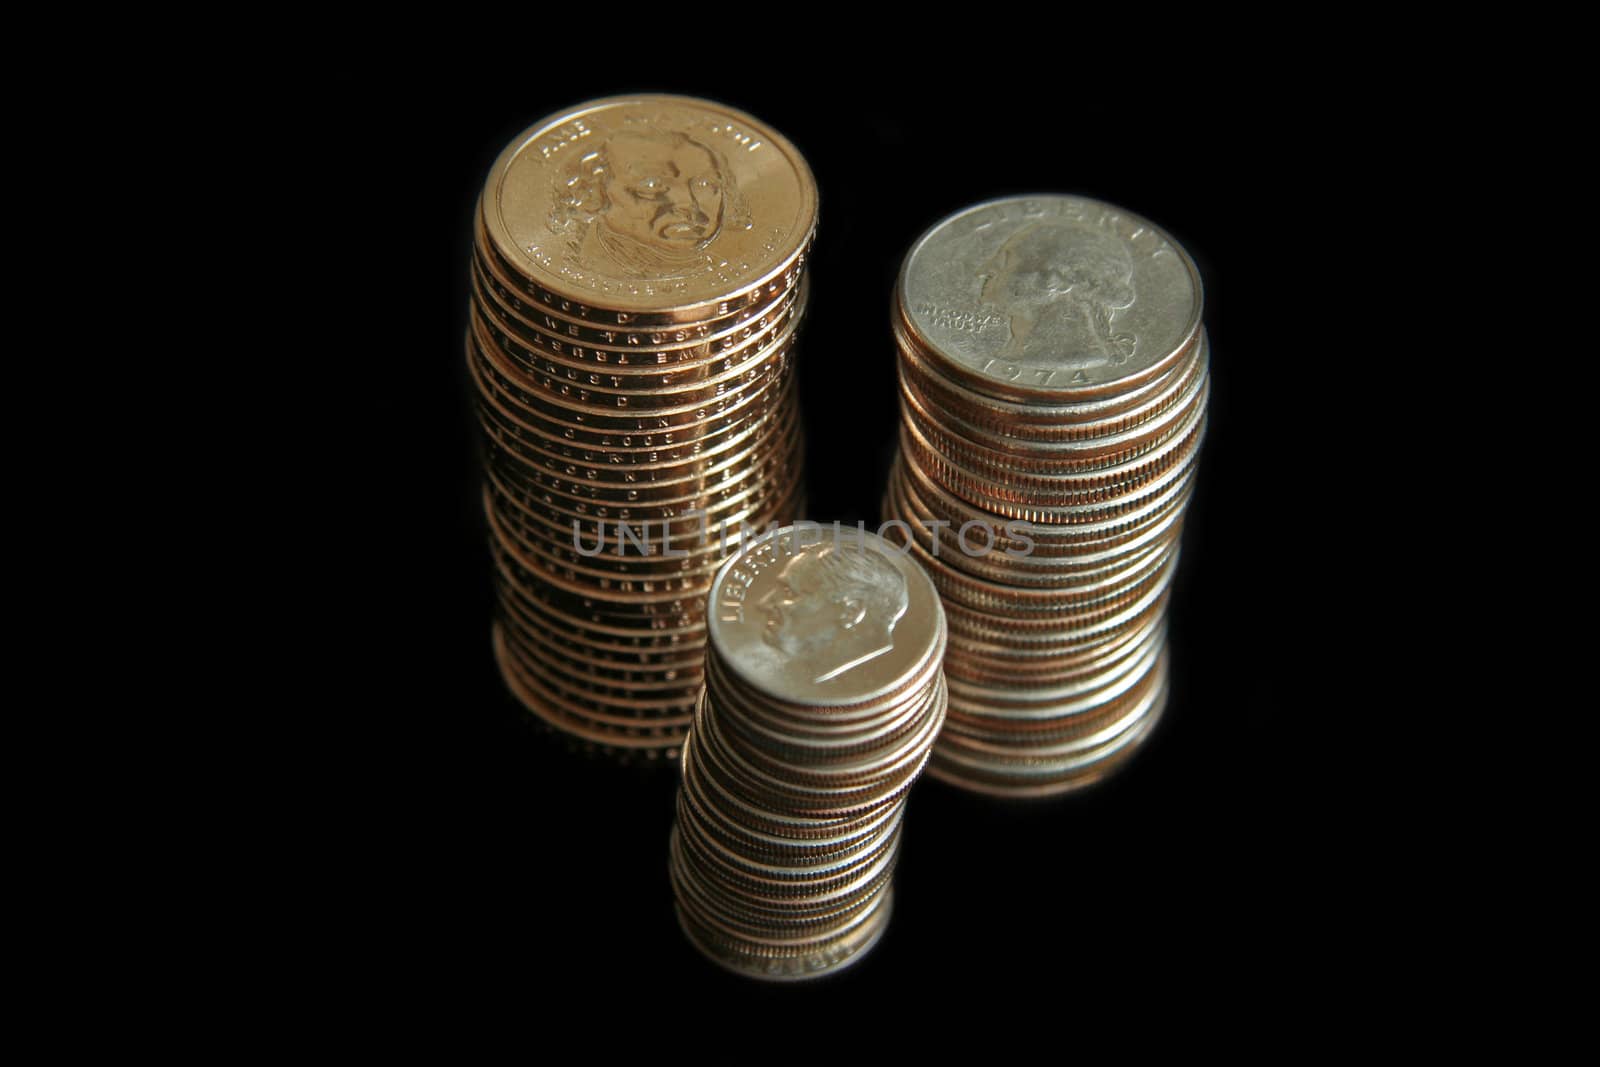 Multiple stacks of United States coins